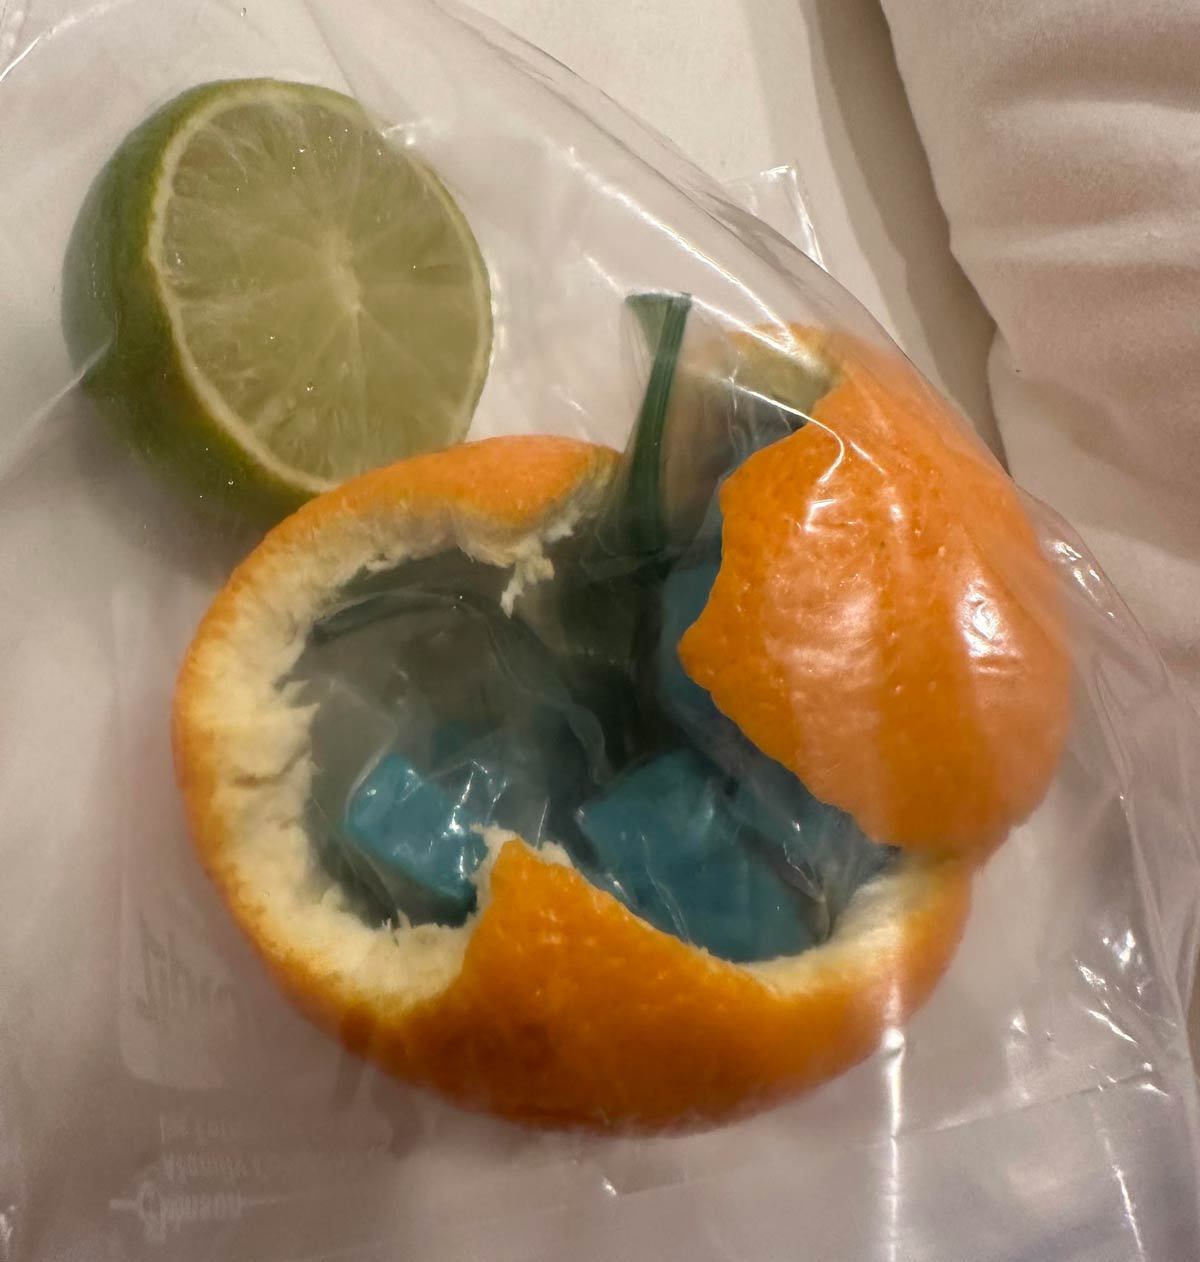 My sister's mother-in-law was told she should put her weed gummies next to citrus when she flies to hide the smell